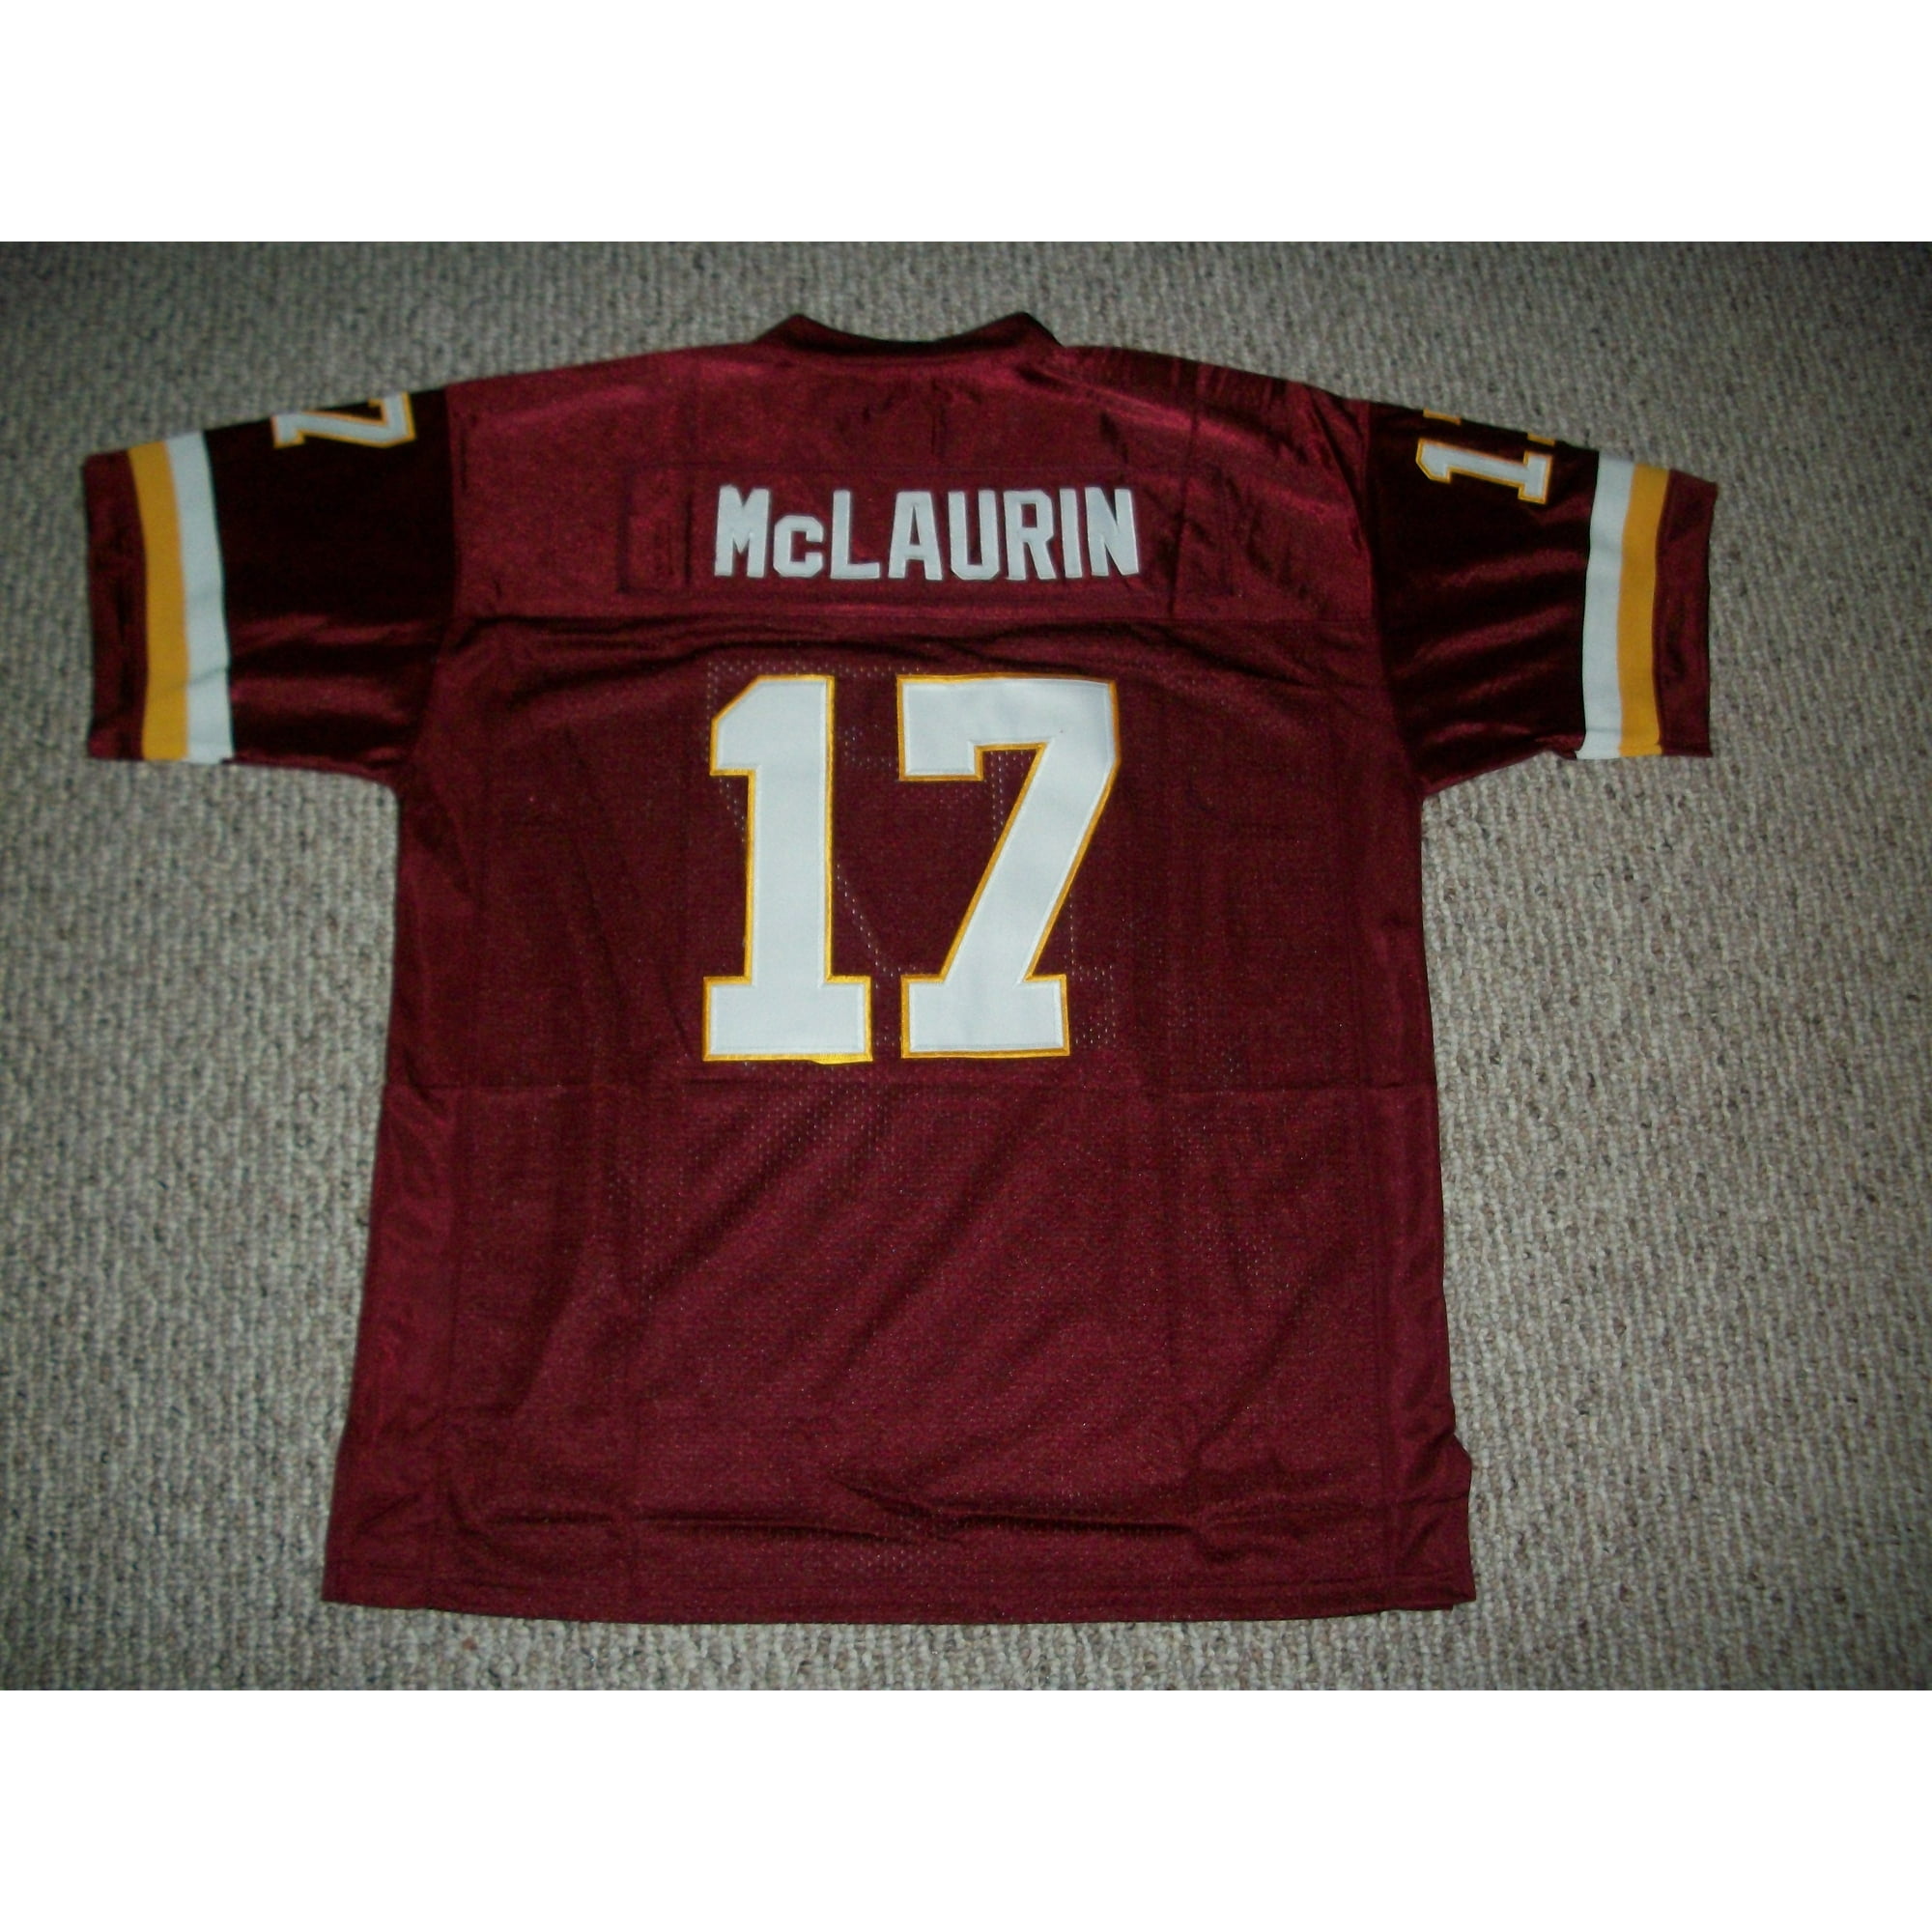 Terry McLaurin Jersey #17 Washington Unsigned Custom Stitched Burgundy  Football New No Brands/Logos Sizes S-3XL 